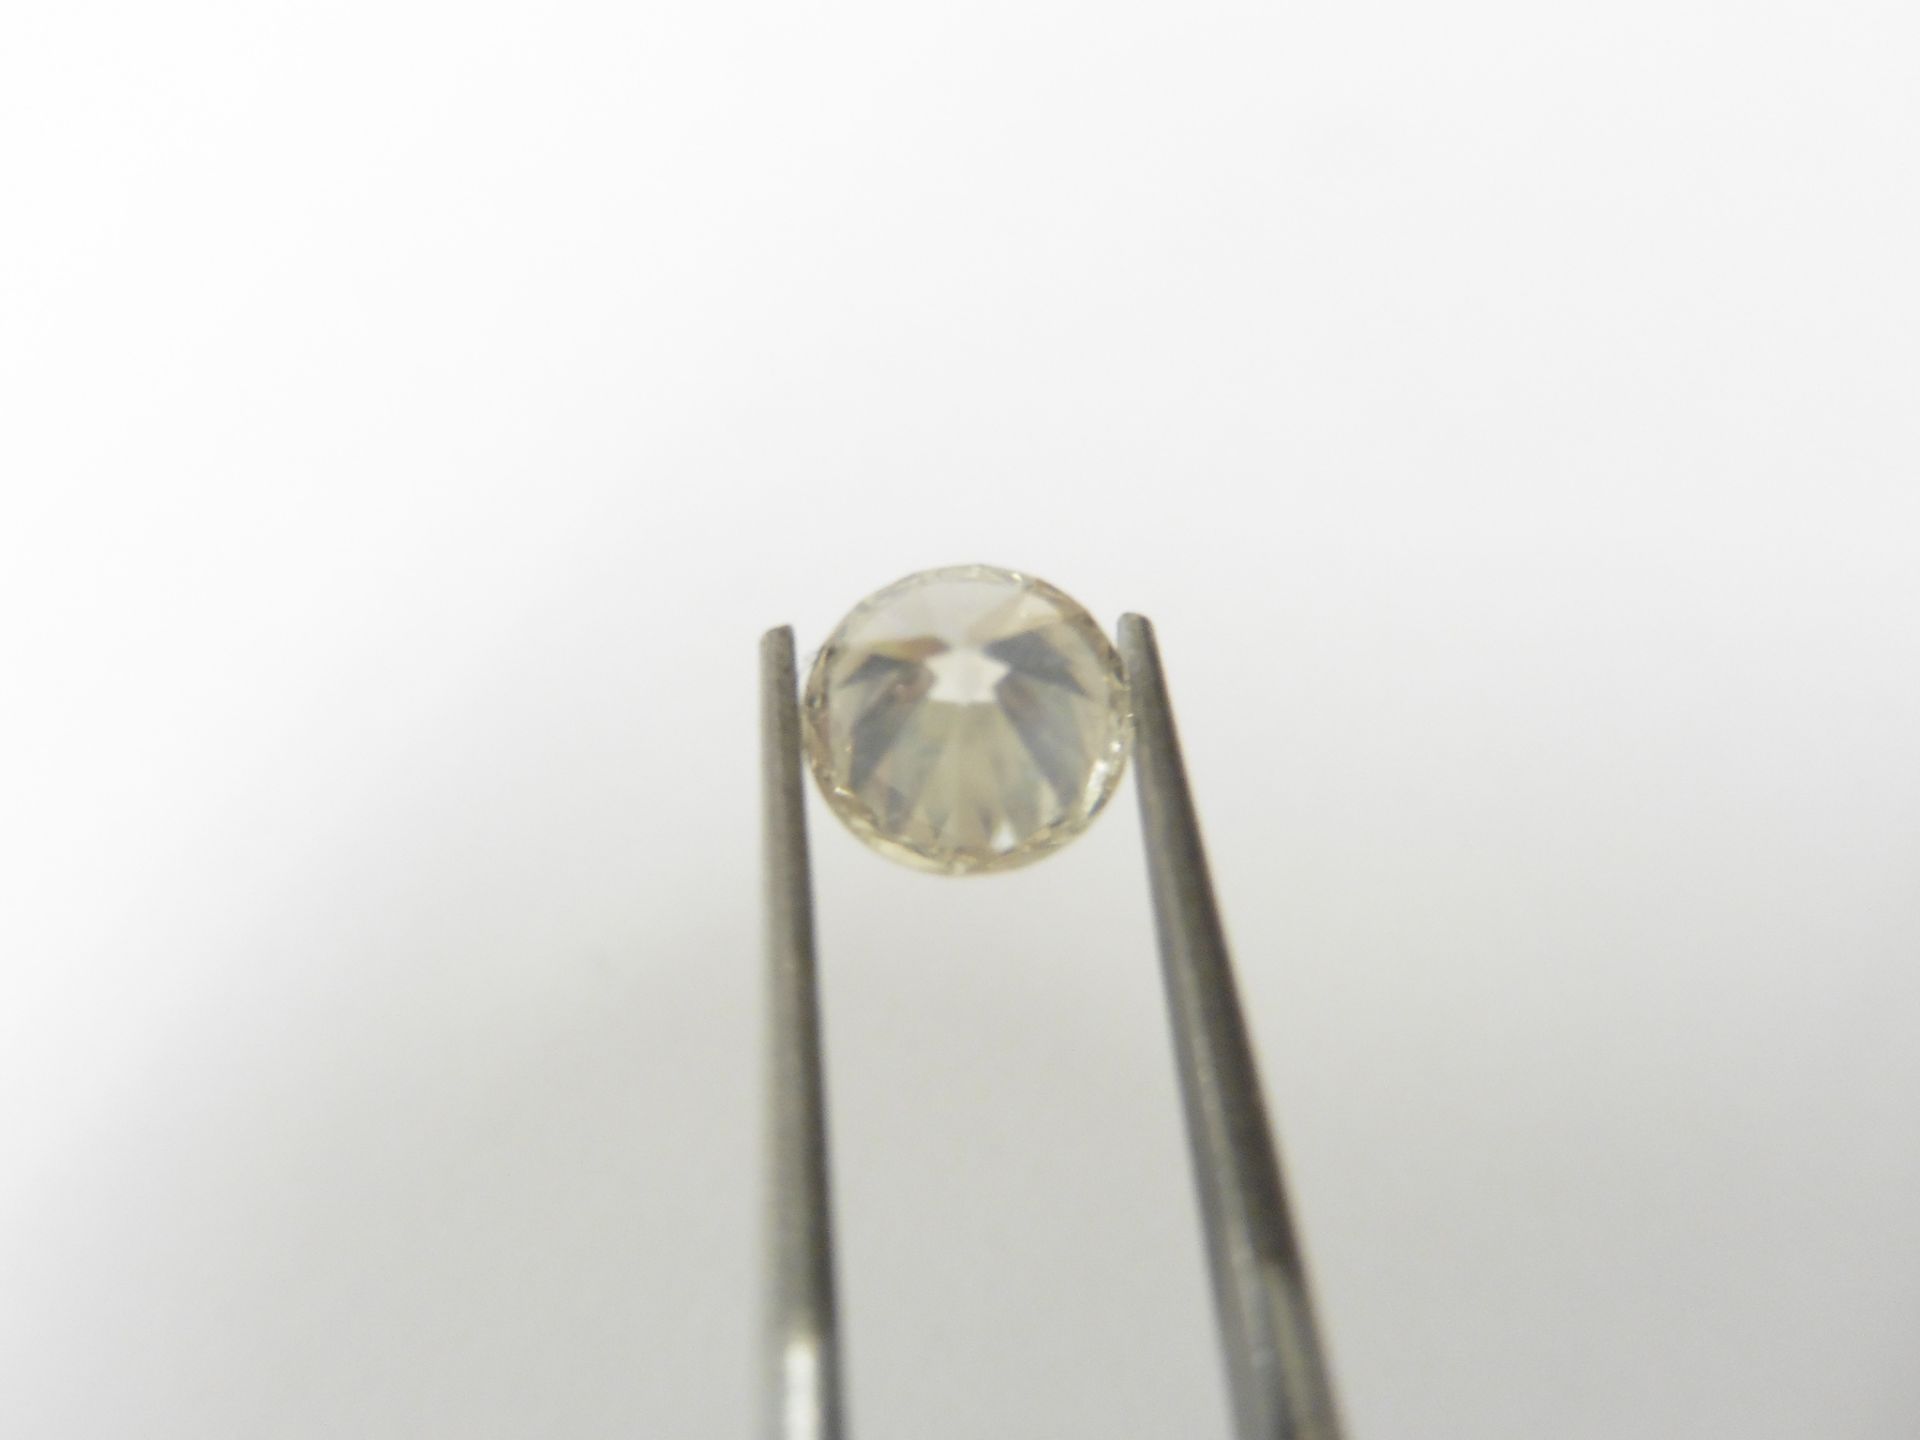 1.73ct natural loose brilliant cut diamond. H colour and I1 clarity. No certification but can be - Image 5 of 5